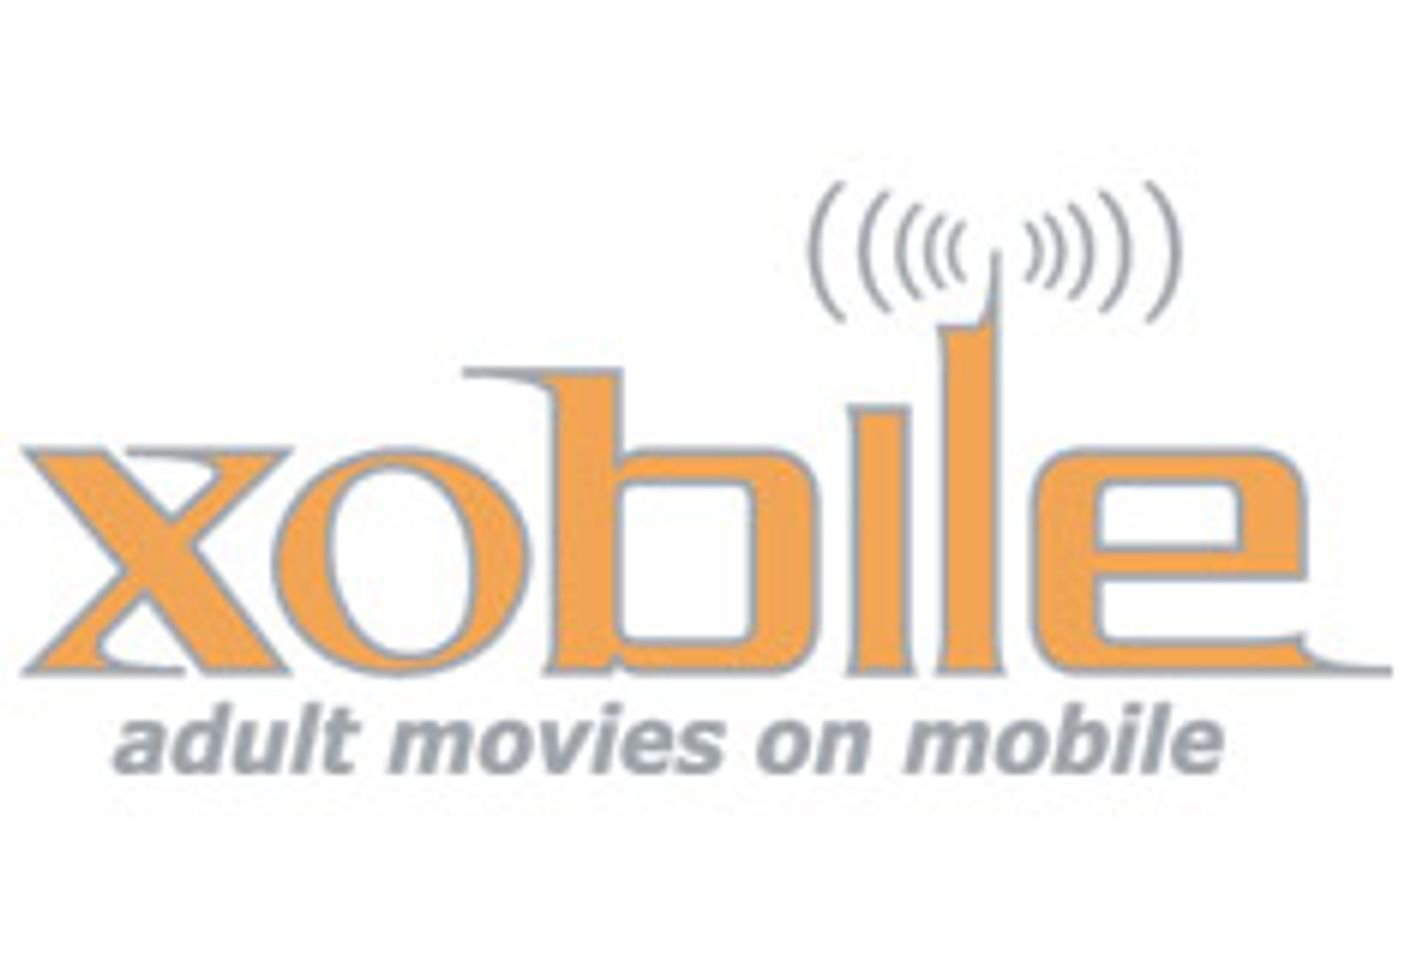 Xobile Delivers Super High Speed Content Via 3G Networks